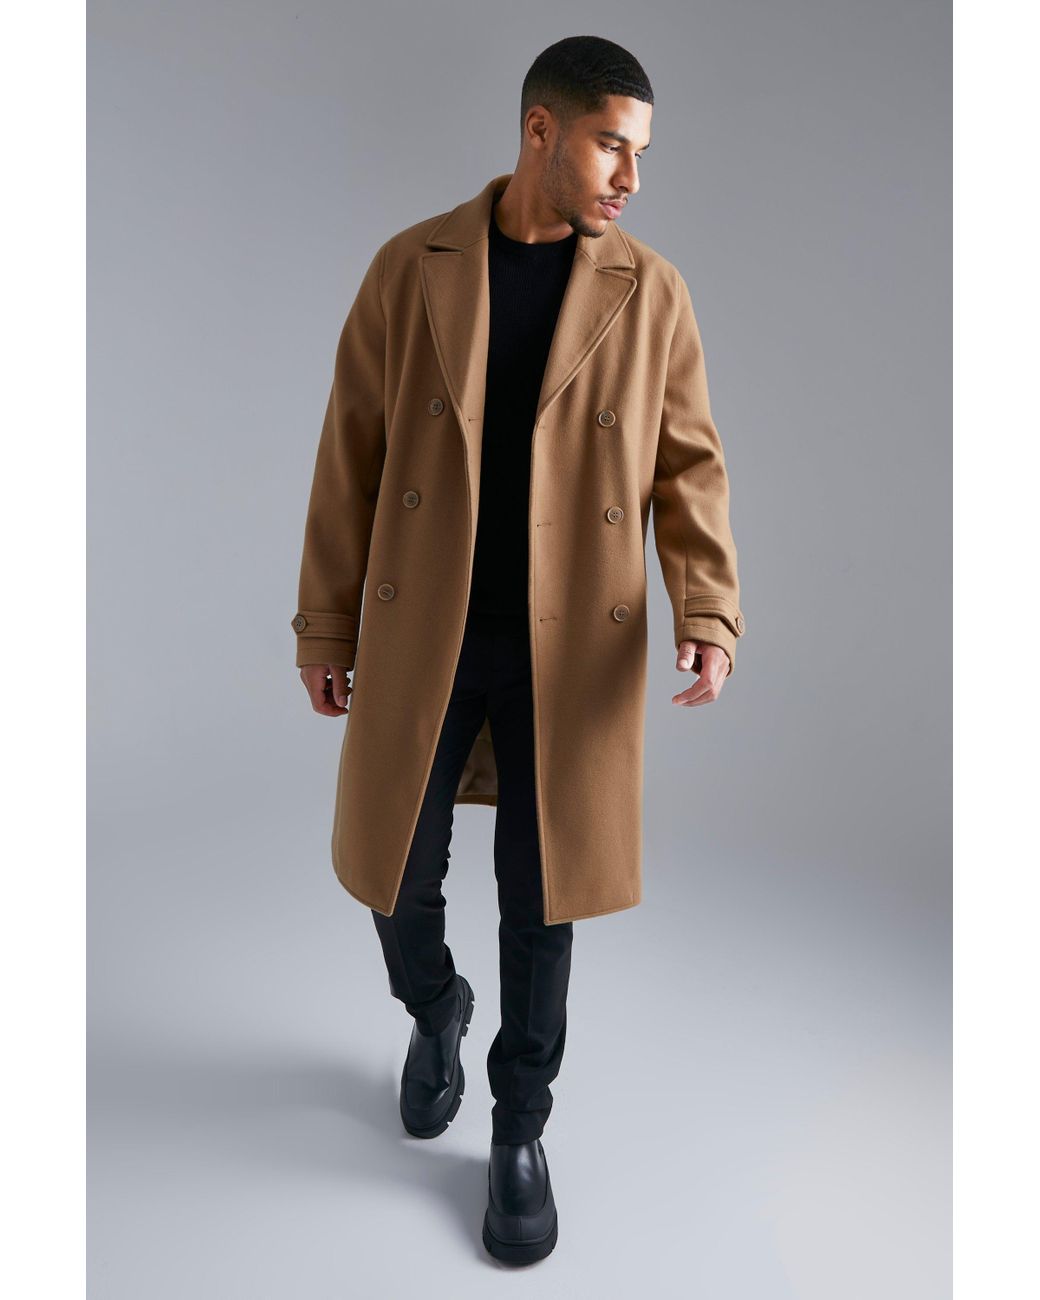 BoohooMAN Tall Double Breasted Wool Look Overcoat in Natural for Men | Lyst